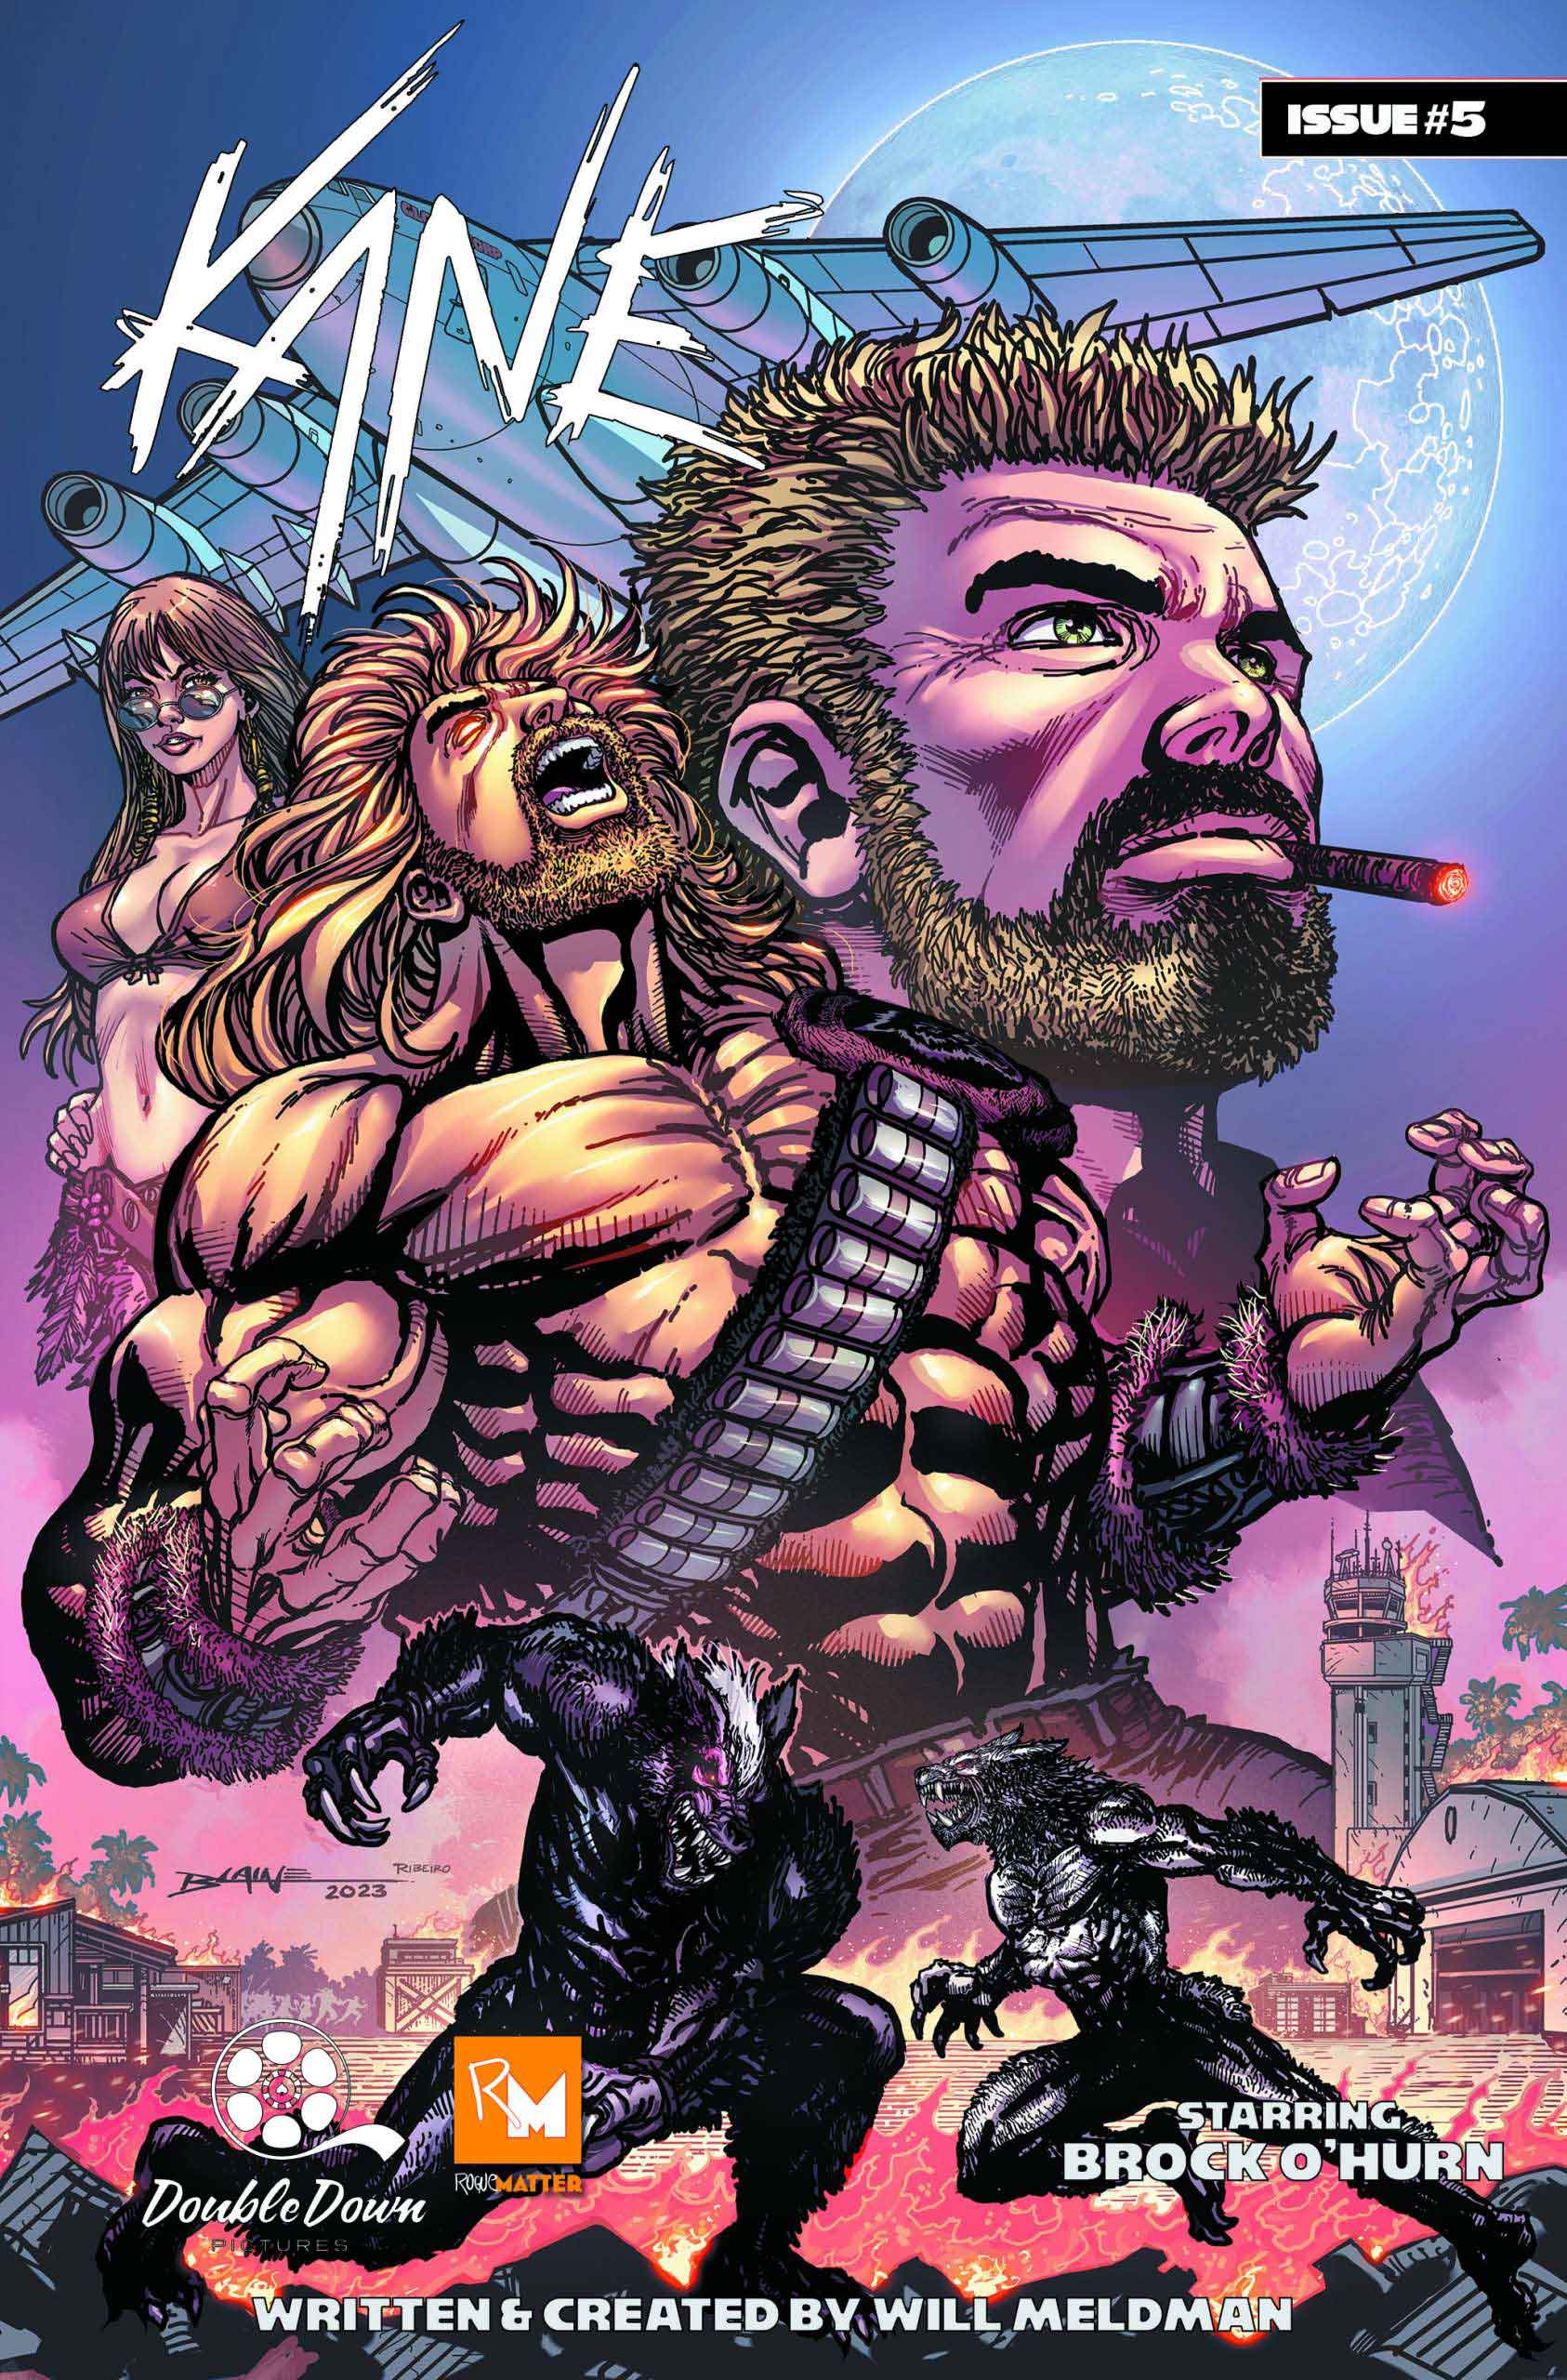 Comic book cover featuring two men and a woman in action poses, set against a dynamic cityscape backdrop by WILL MELDMAN.